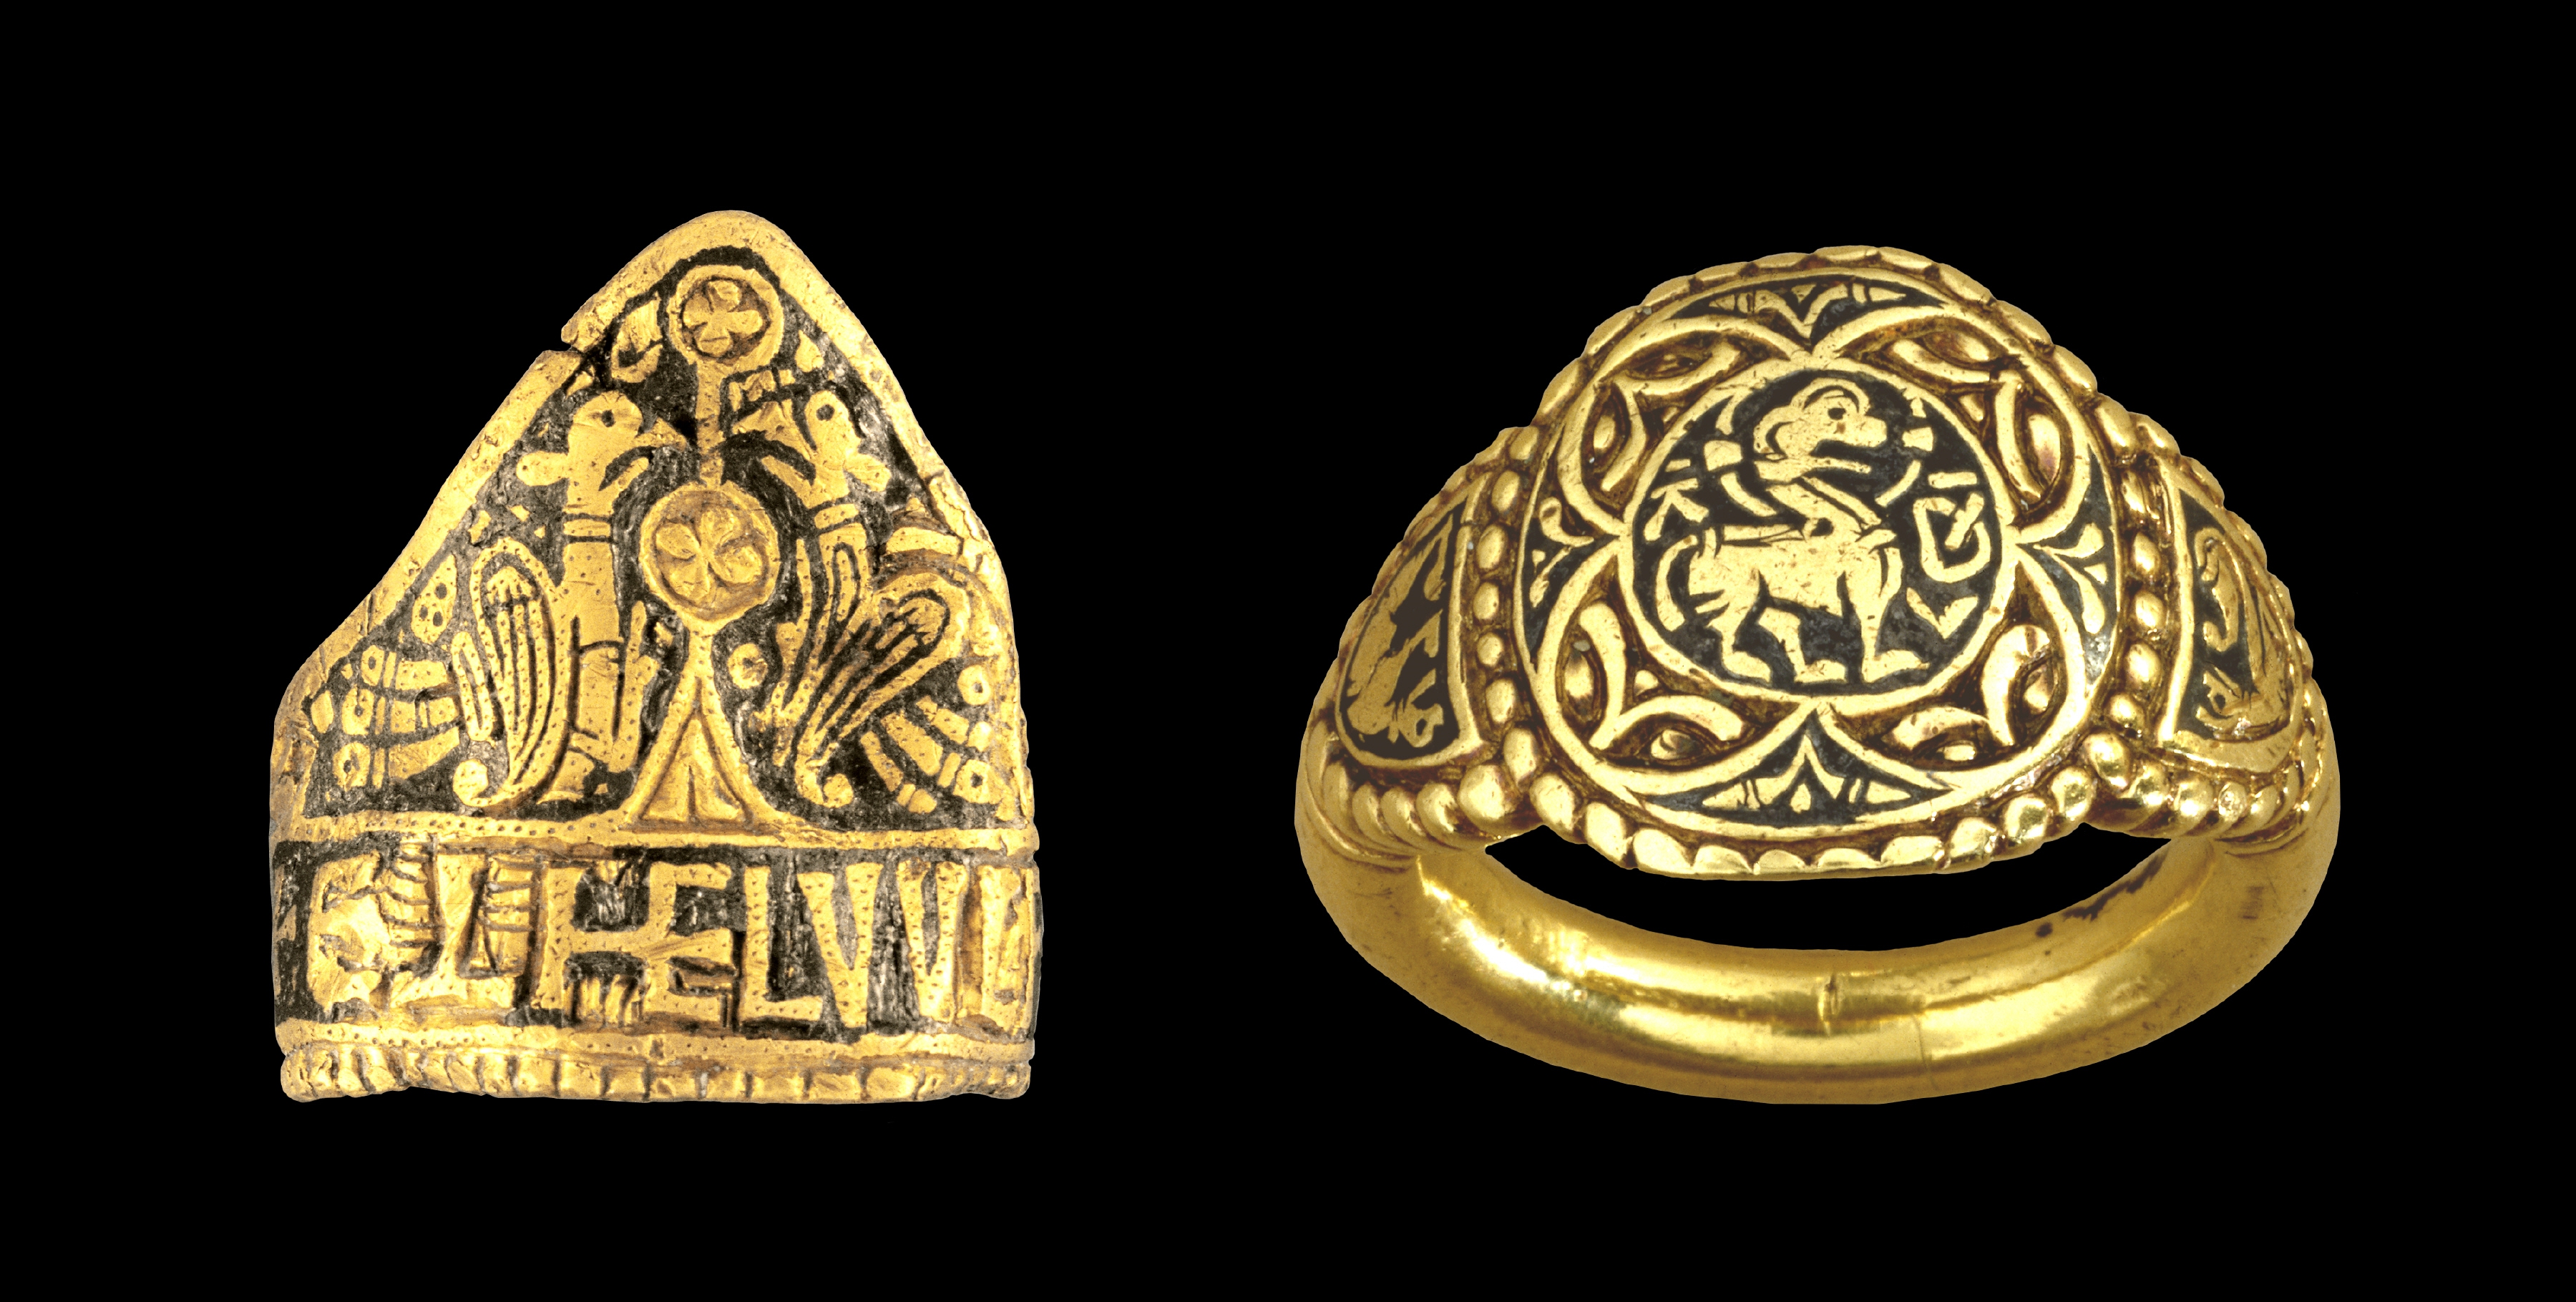 Teaching History with 100 Objects - Anglo-Saxon royal rings